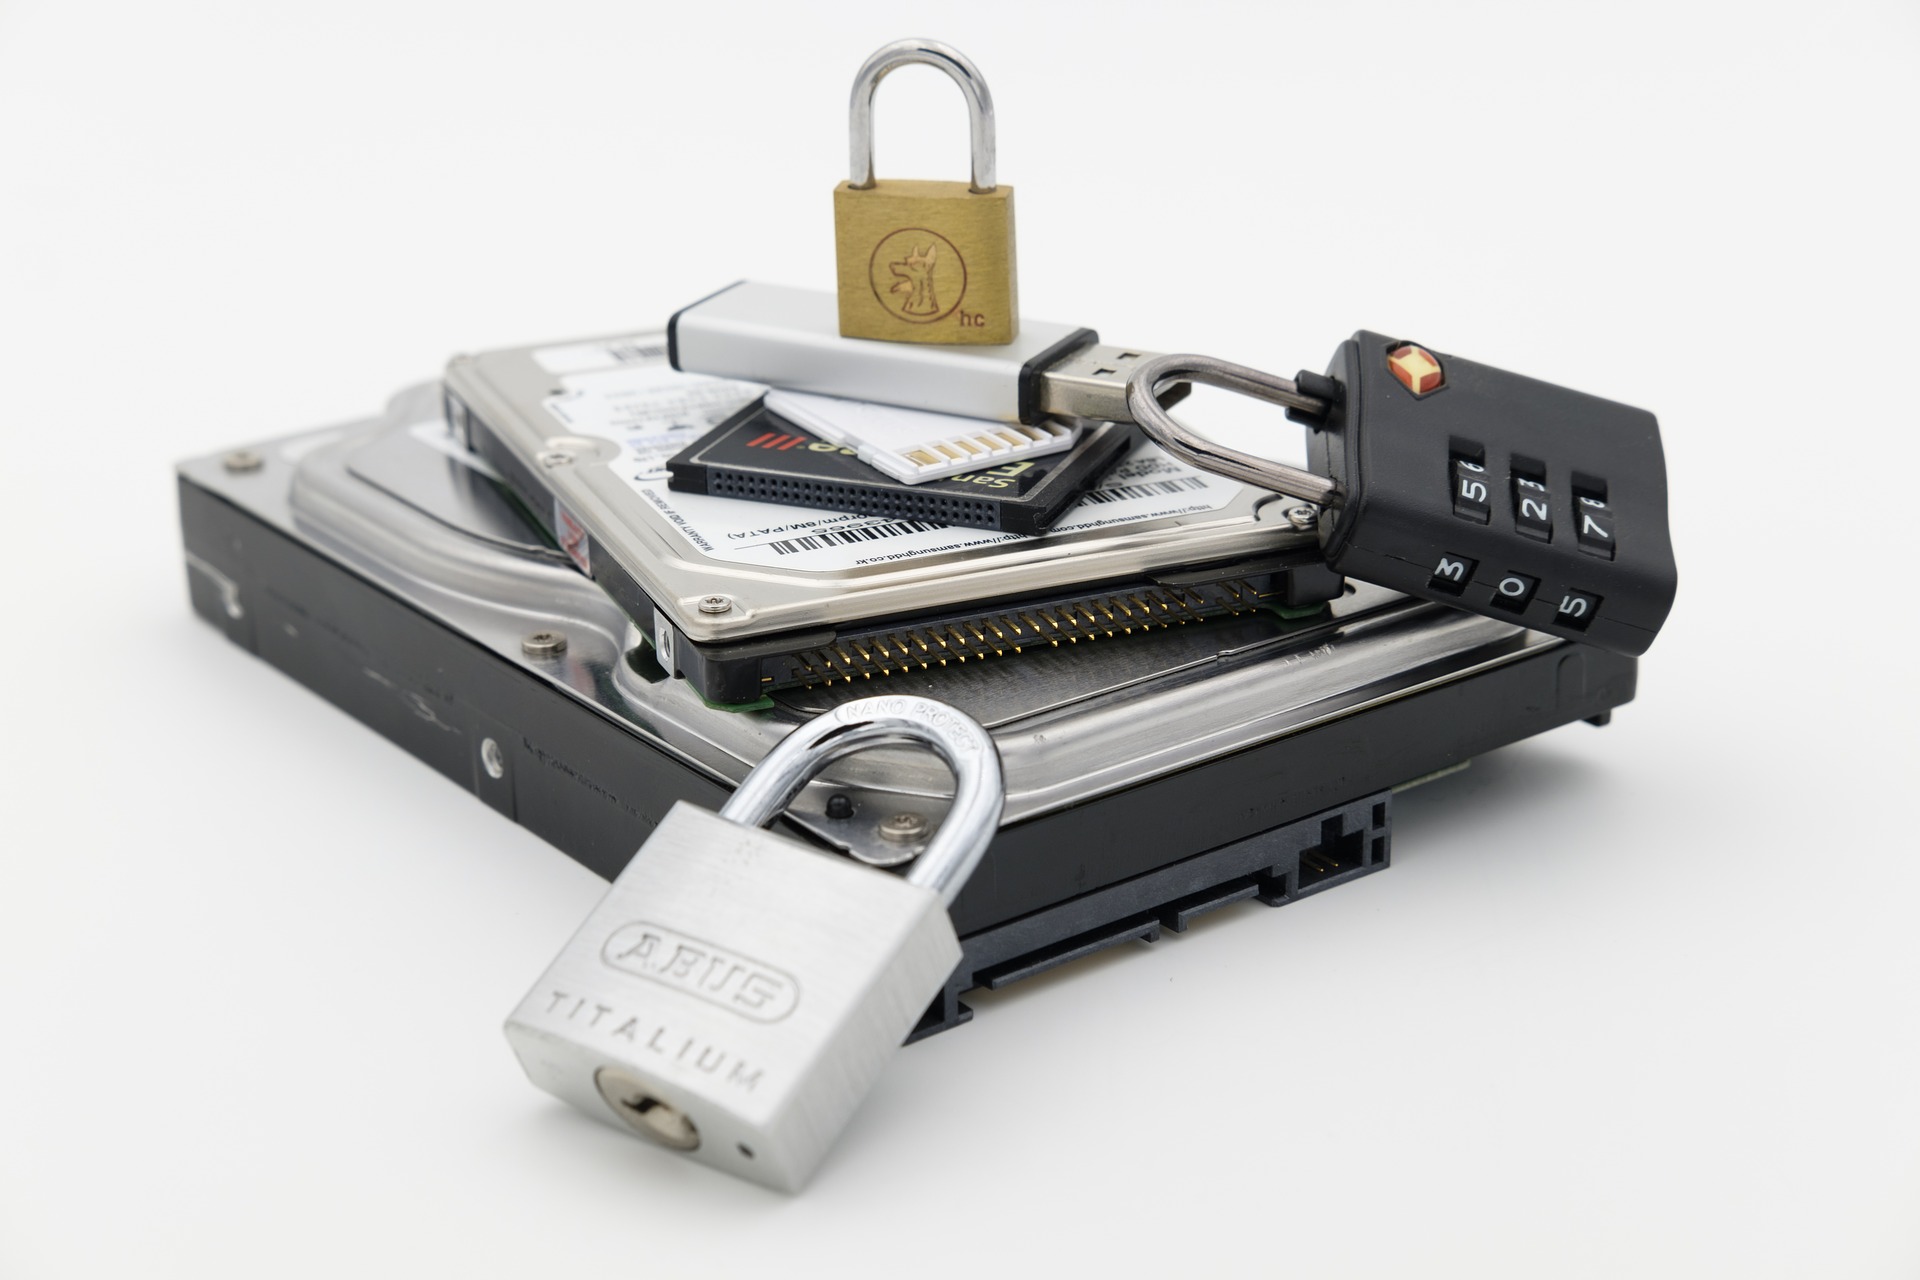 Complete Guide to Finding the Best TSA Lock – Passport and Piano